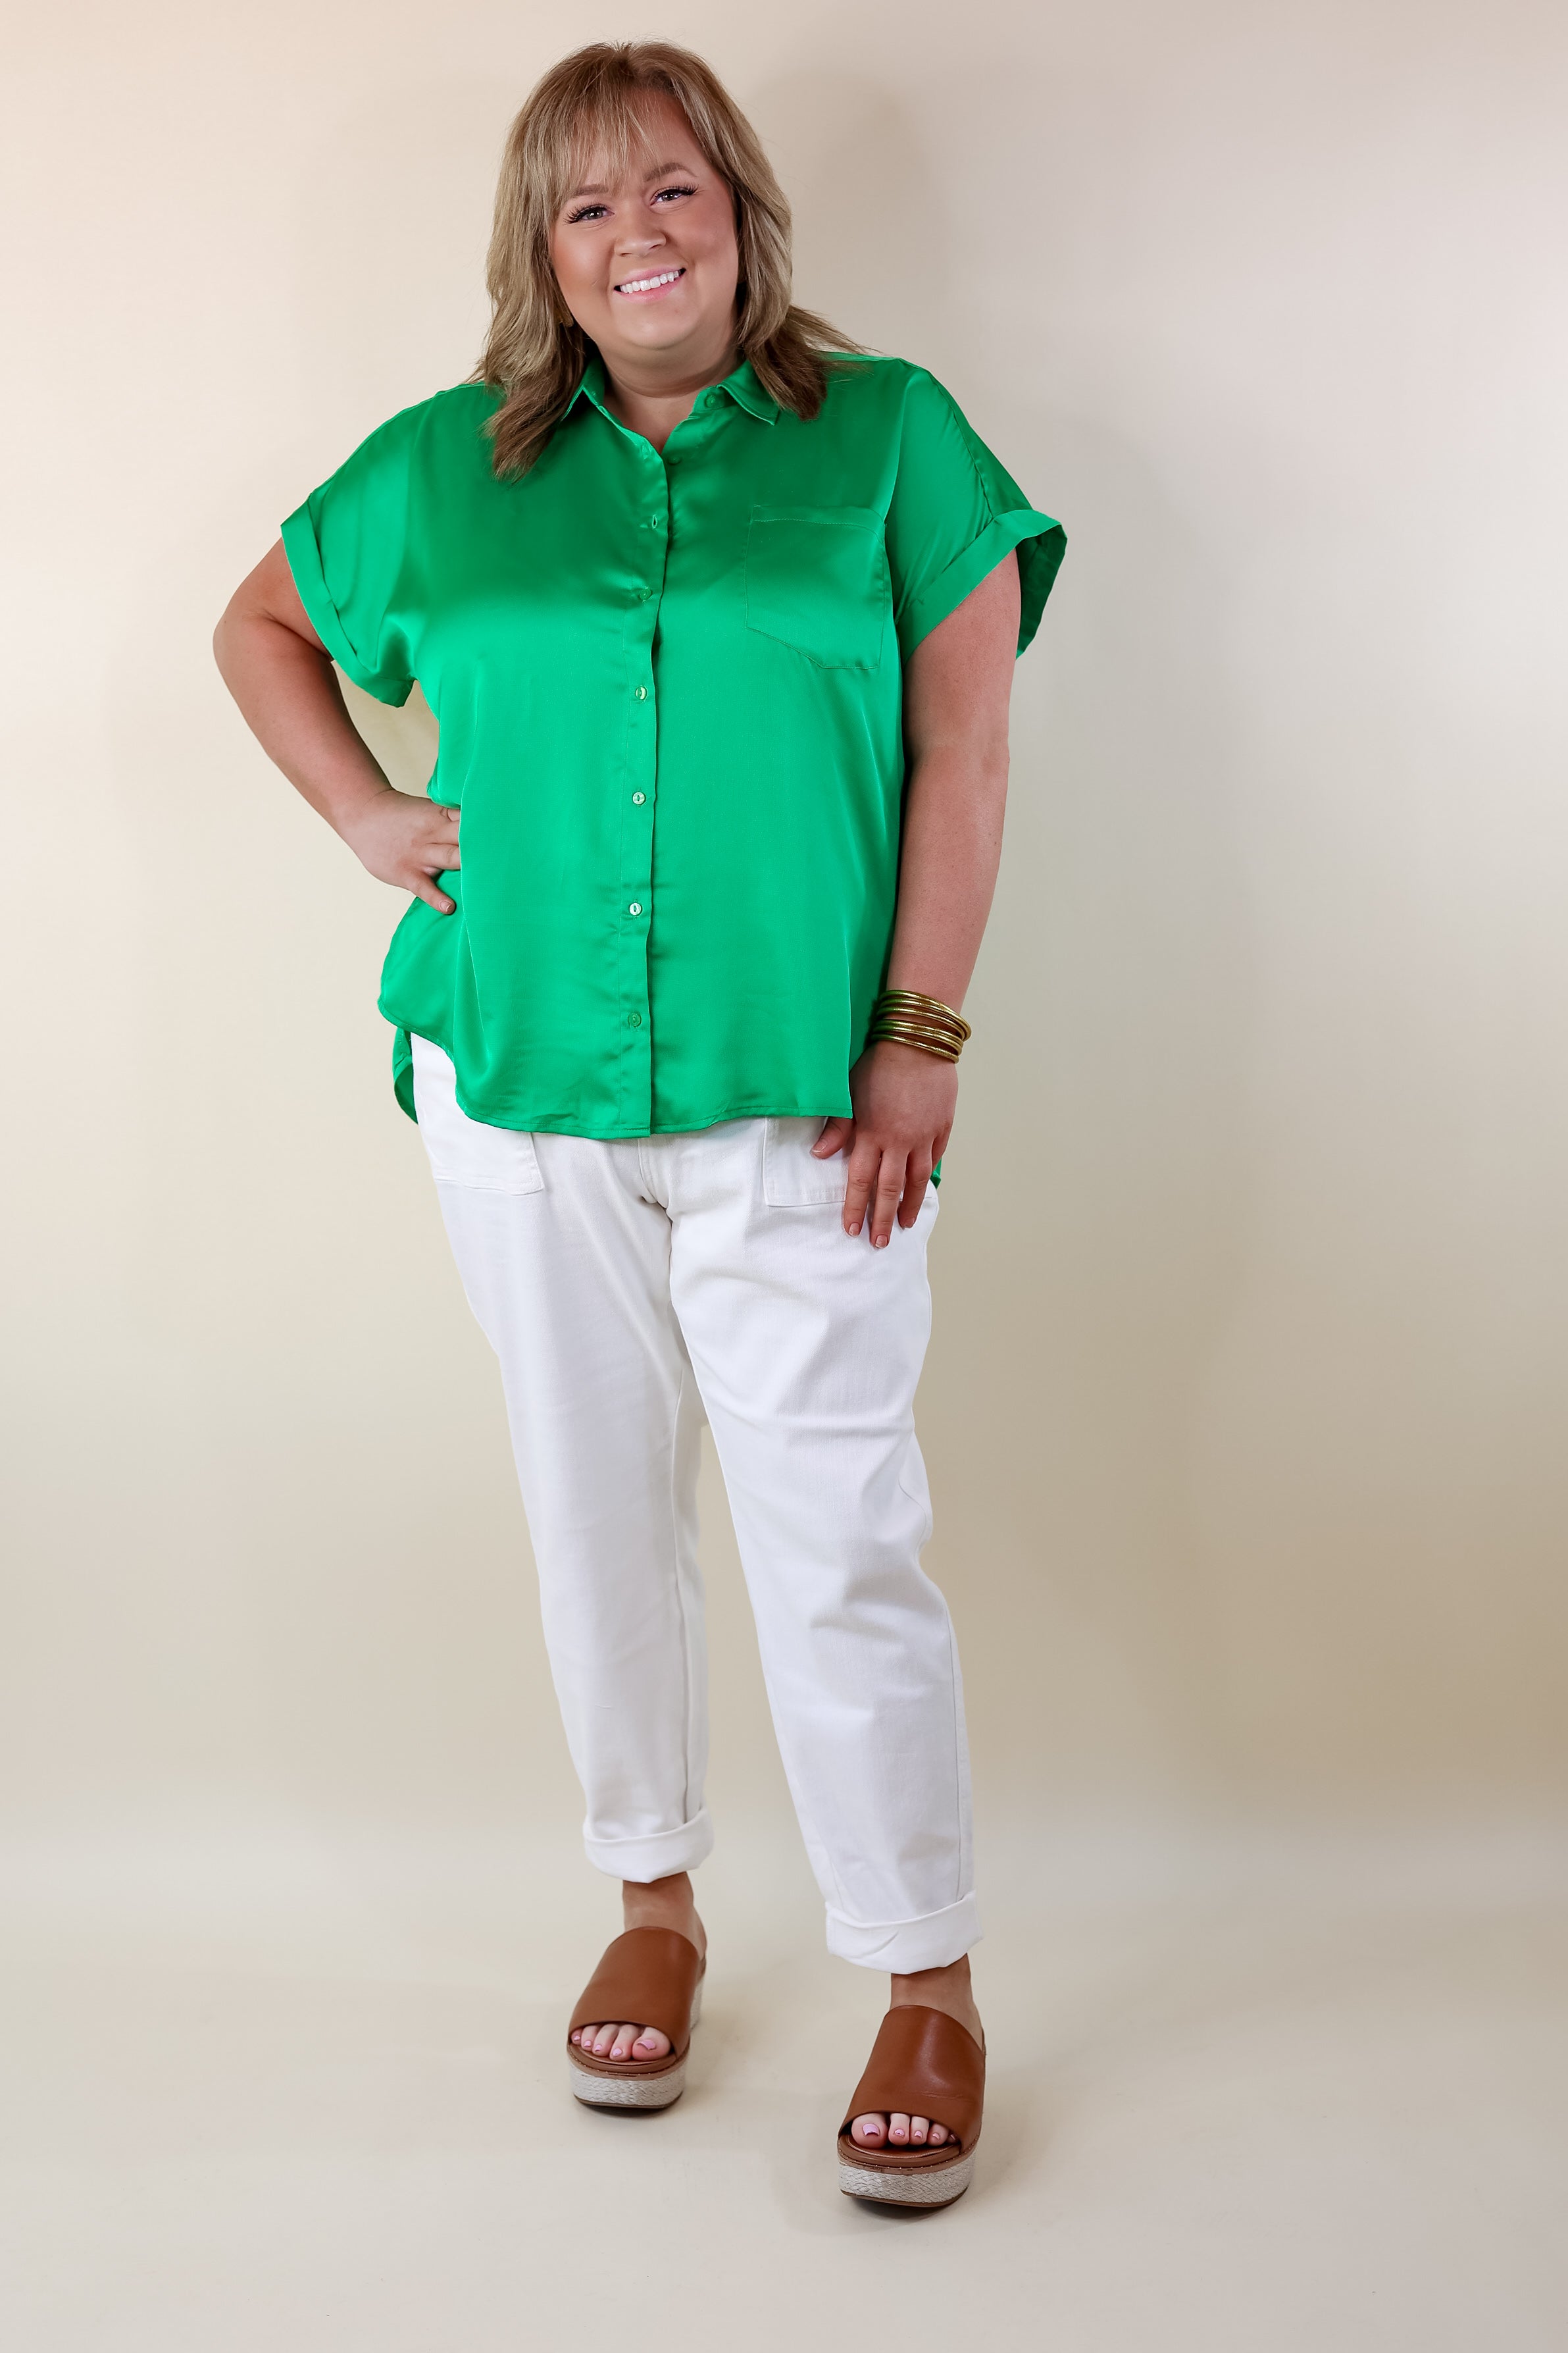 Free To Be Fab Button Up Short Sleeve Top in Green - Giddy Up Glamour Boutique